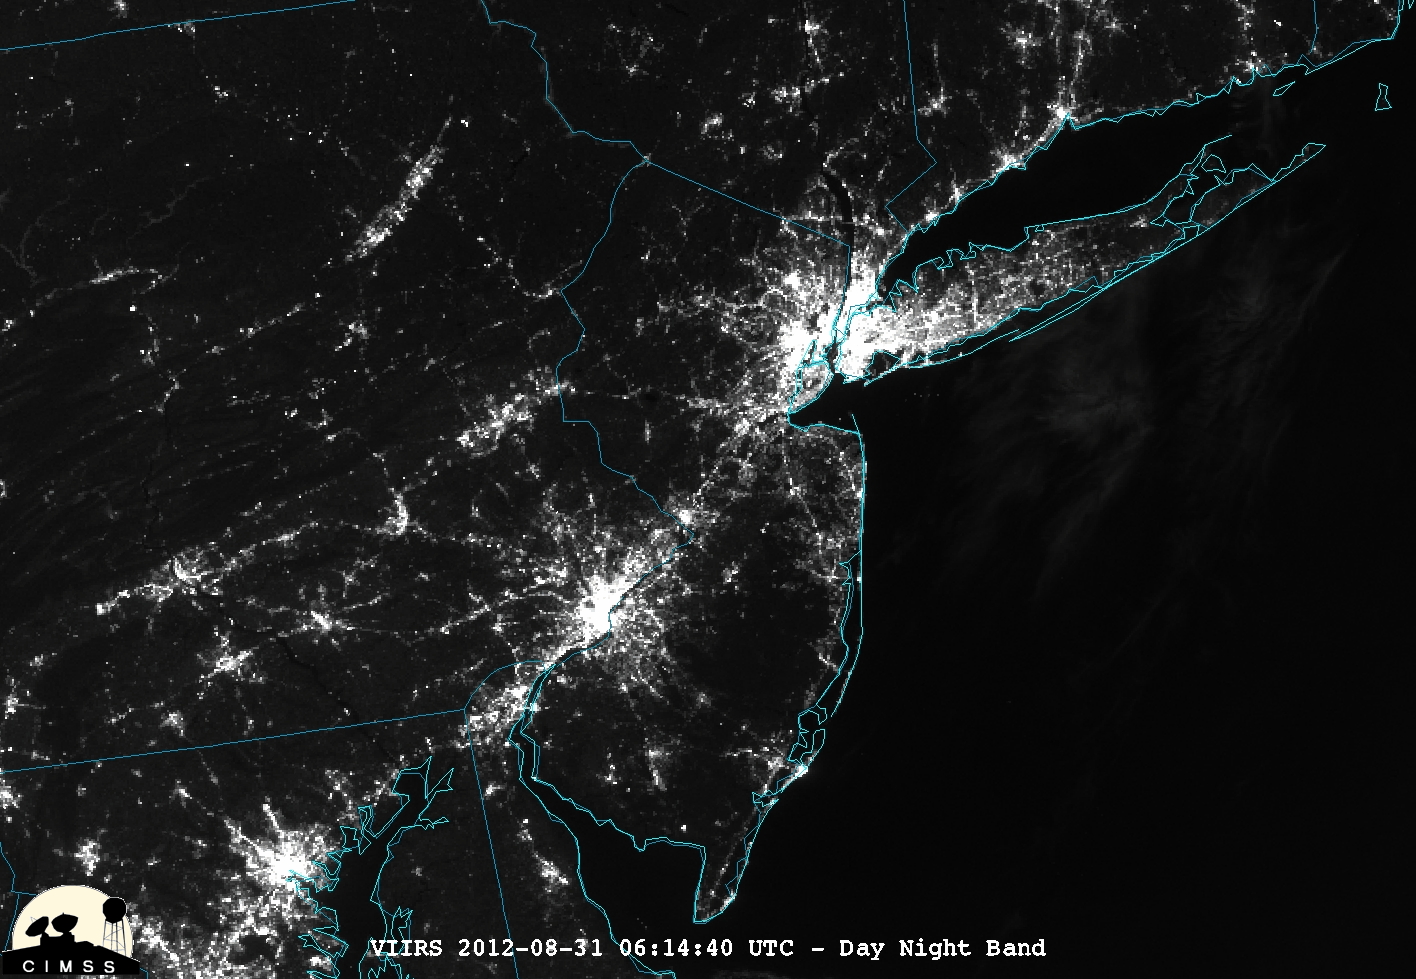 Suomi NPP VIIRS 0.7 Âµm Day/Night Band images (pre-Sandy, and post-Sandy)